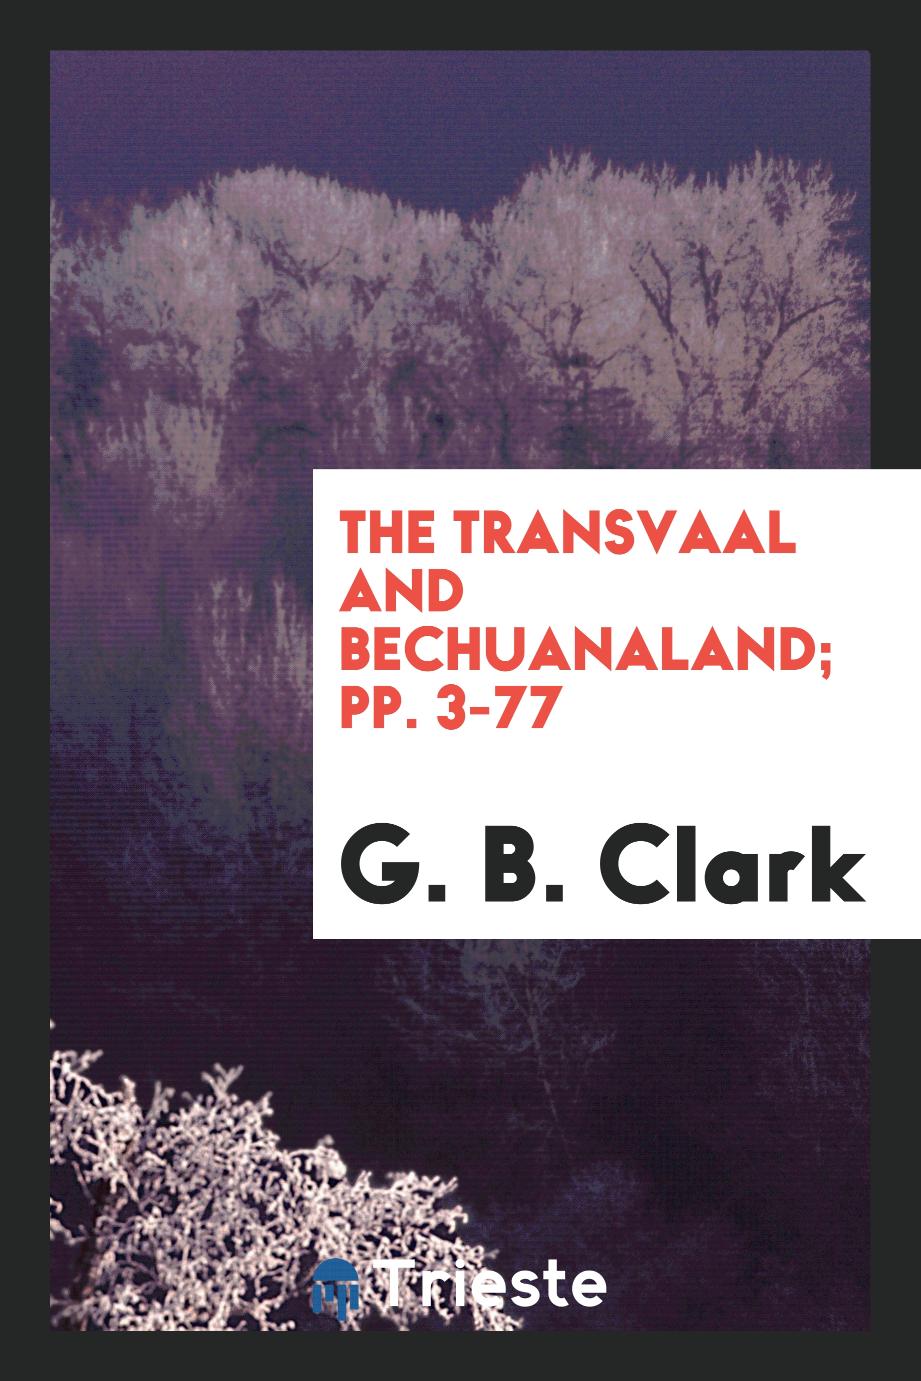 The Transvaal and Bechuanaland; pp. 3-77